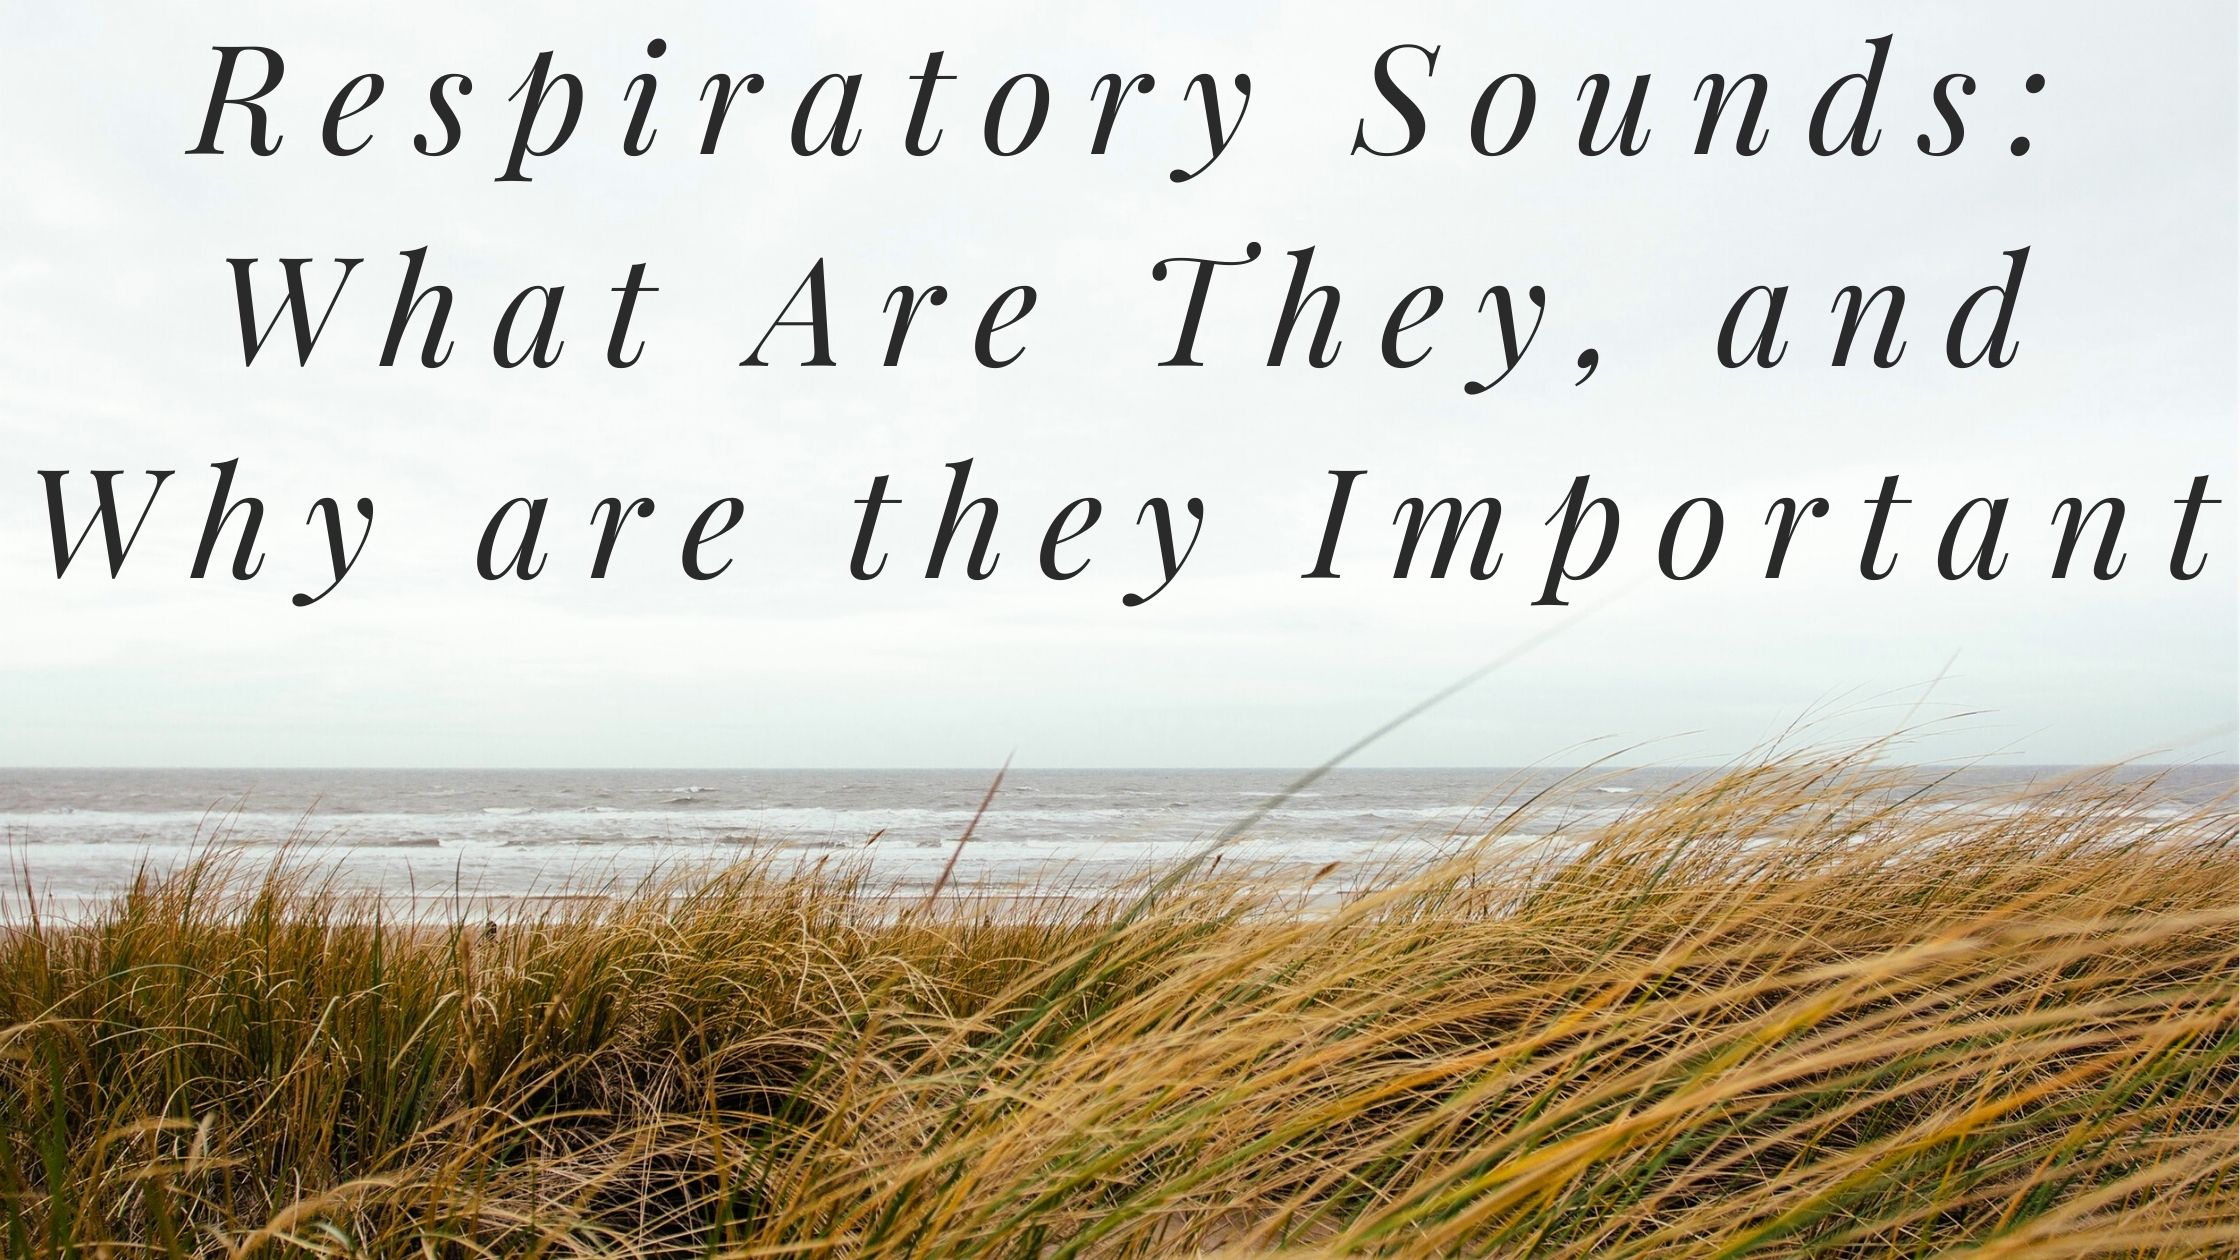 Respiratory Sounds What Are They and Why is it Important